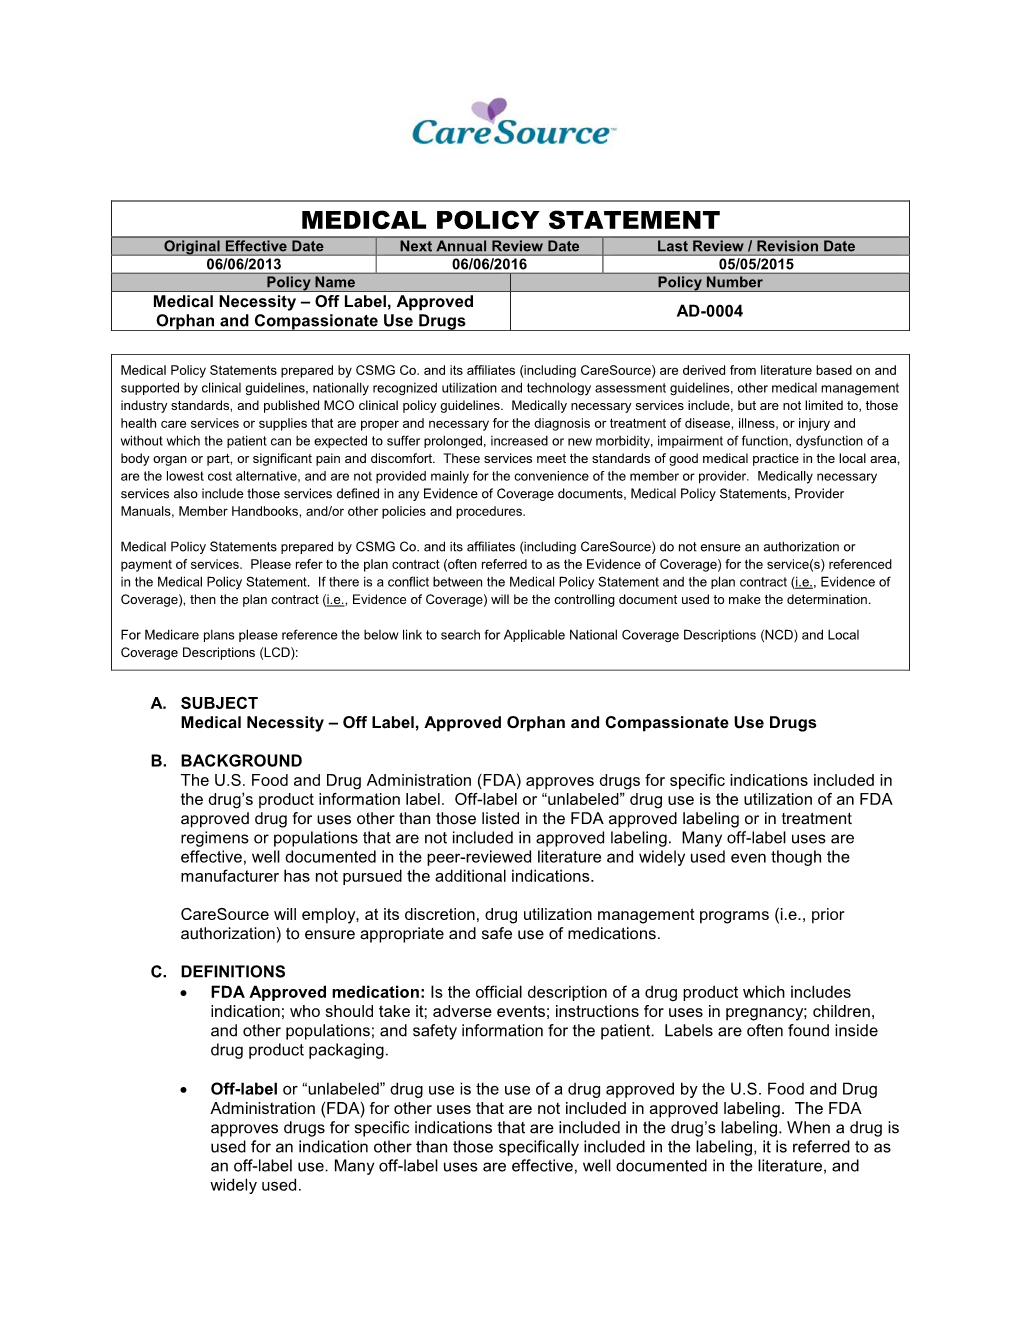 Off-Label and Excluded Indications ADMIN Policy